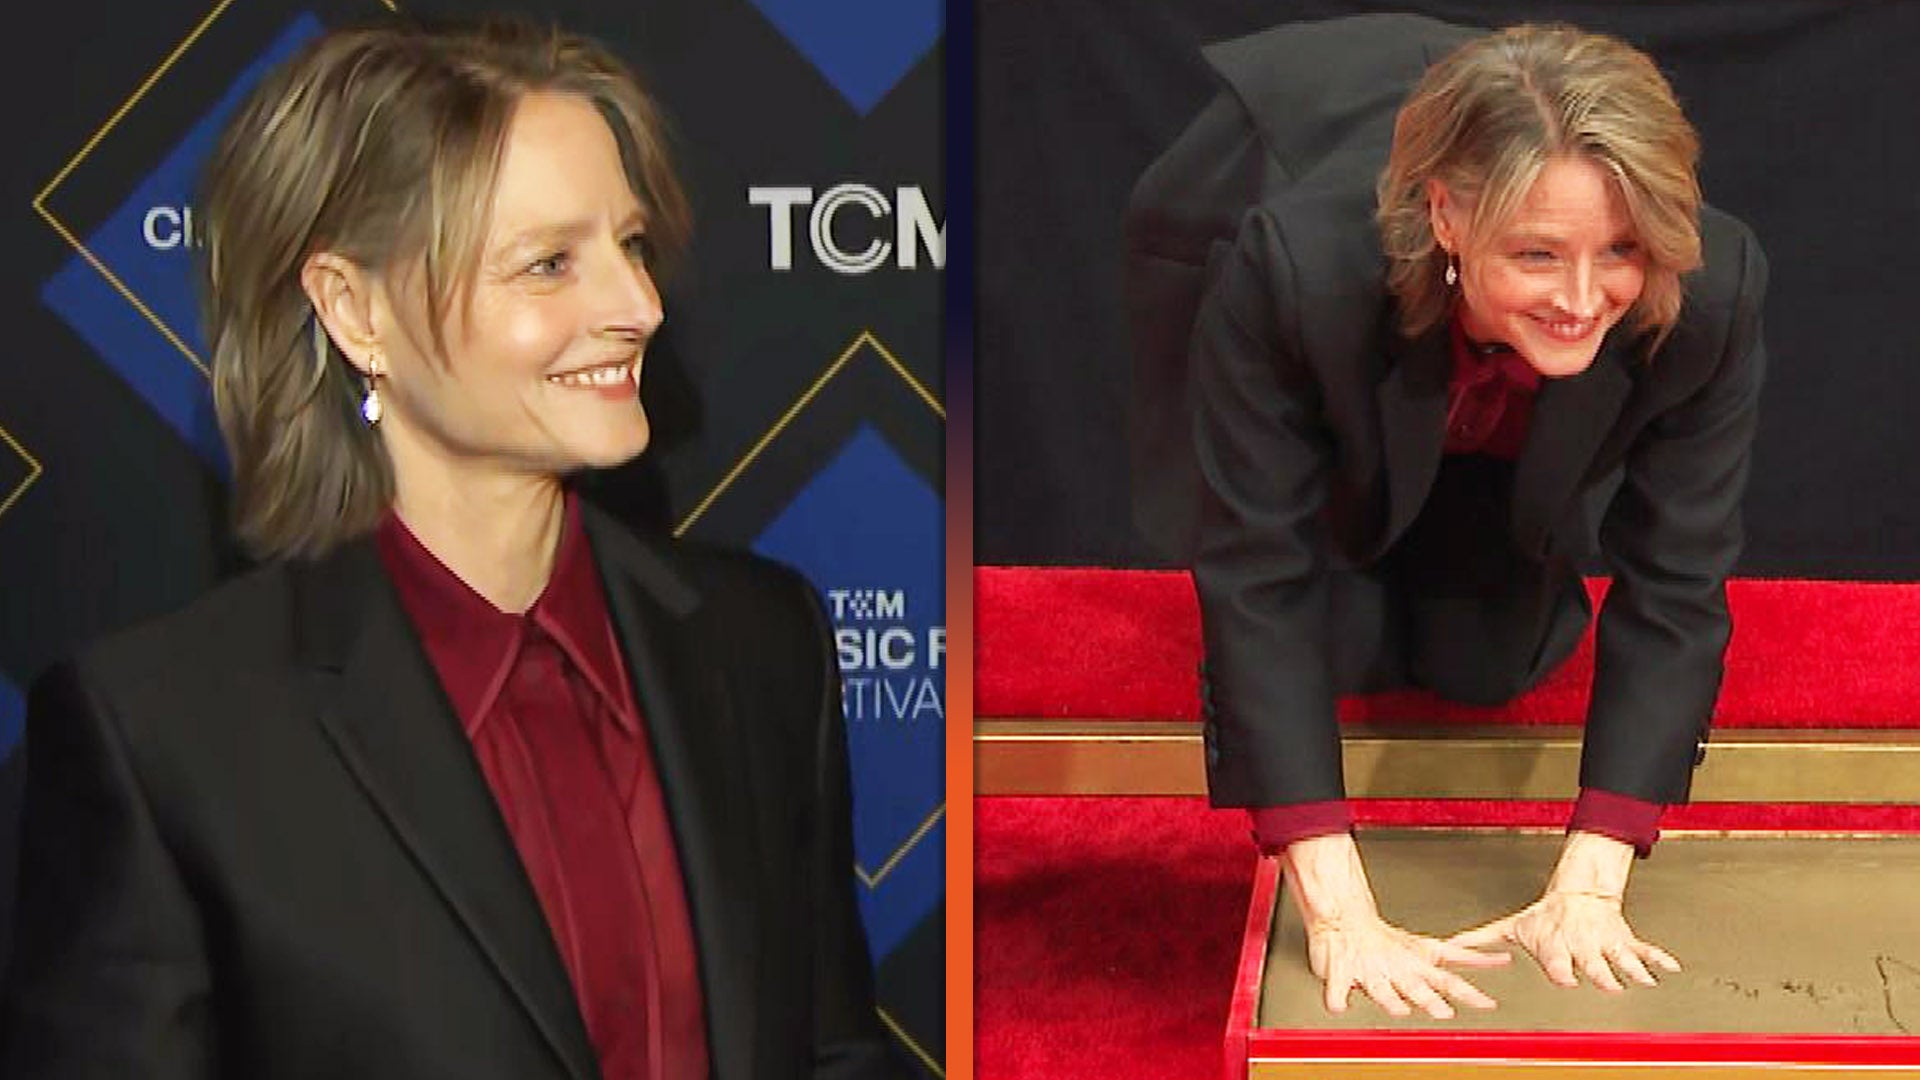 Jodie Foster Gets Cemented Into Hollywood History at TCL Chinese Theater